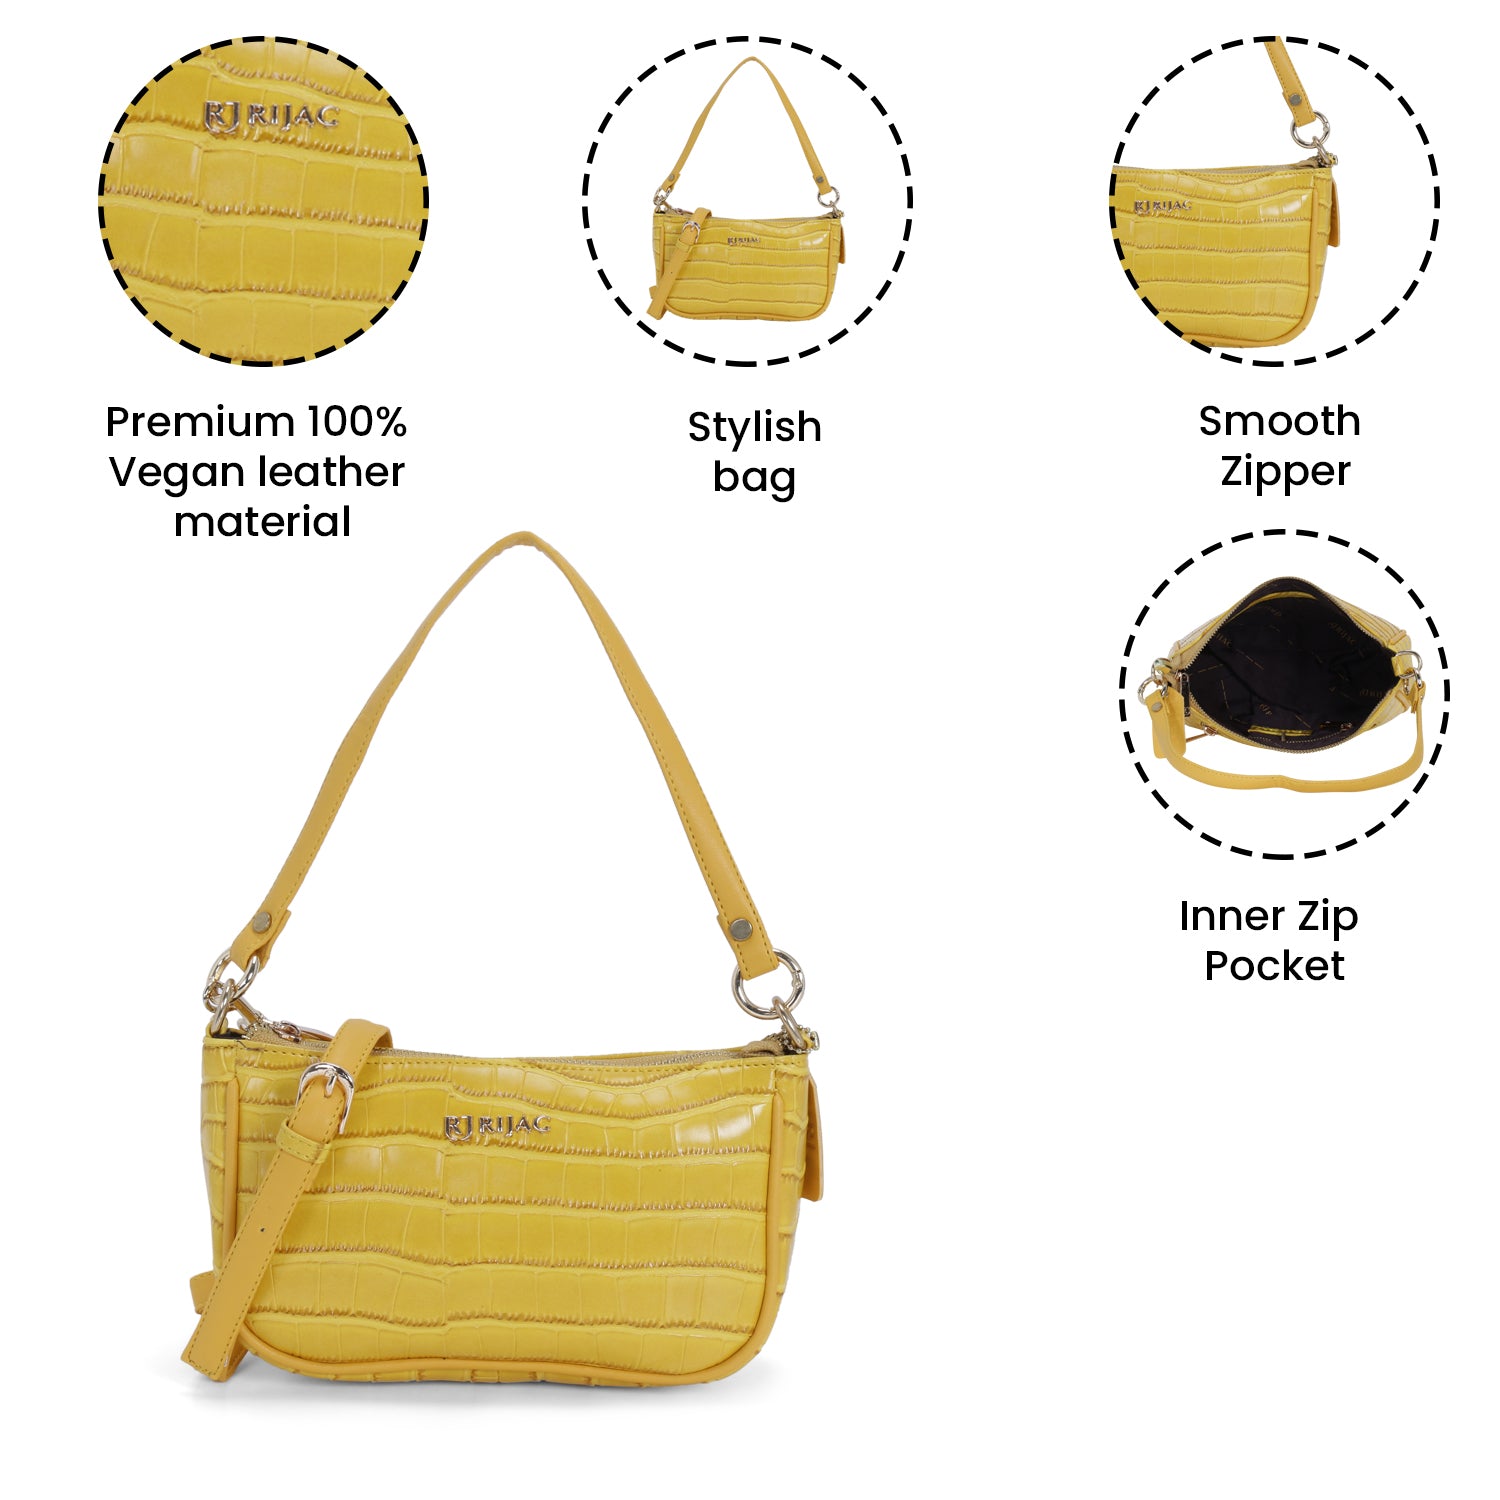 YELLOW SOLEIL DUAL PARTY SLING BAG